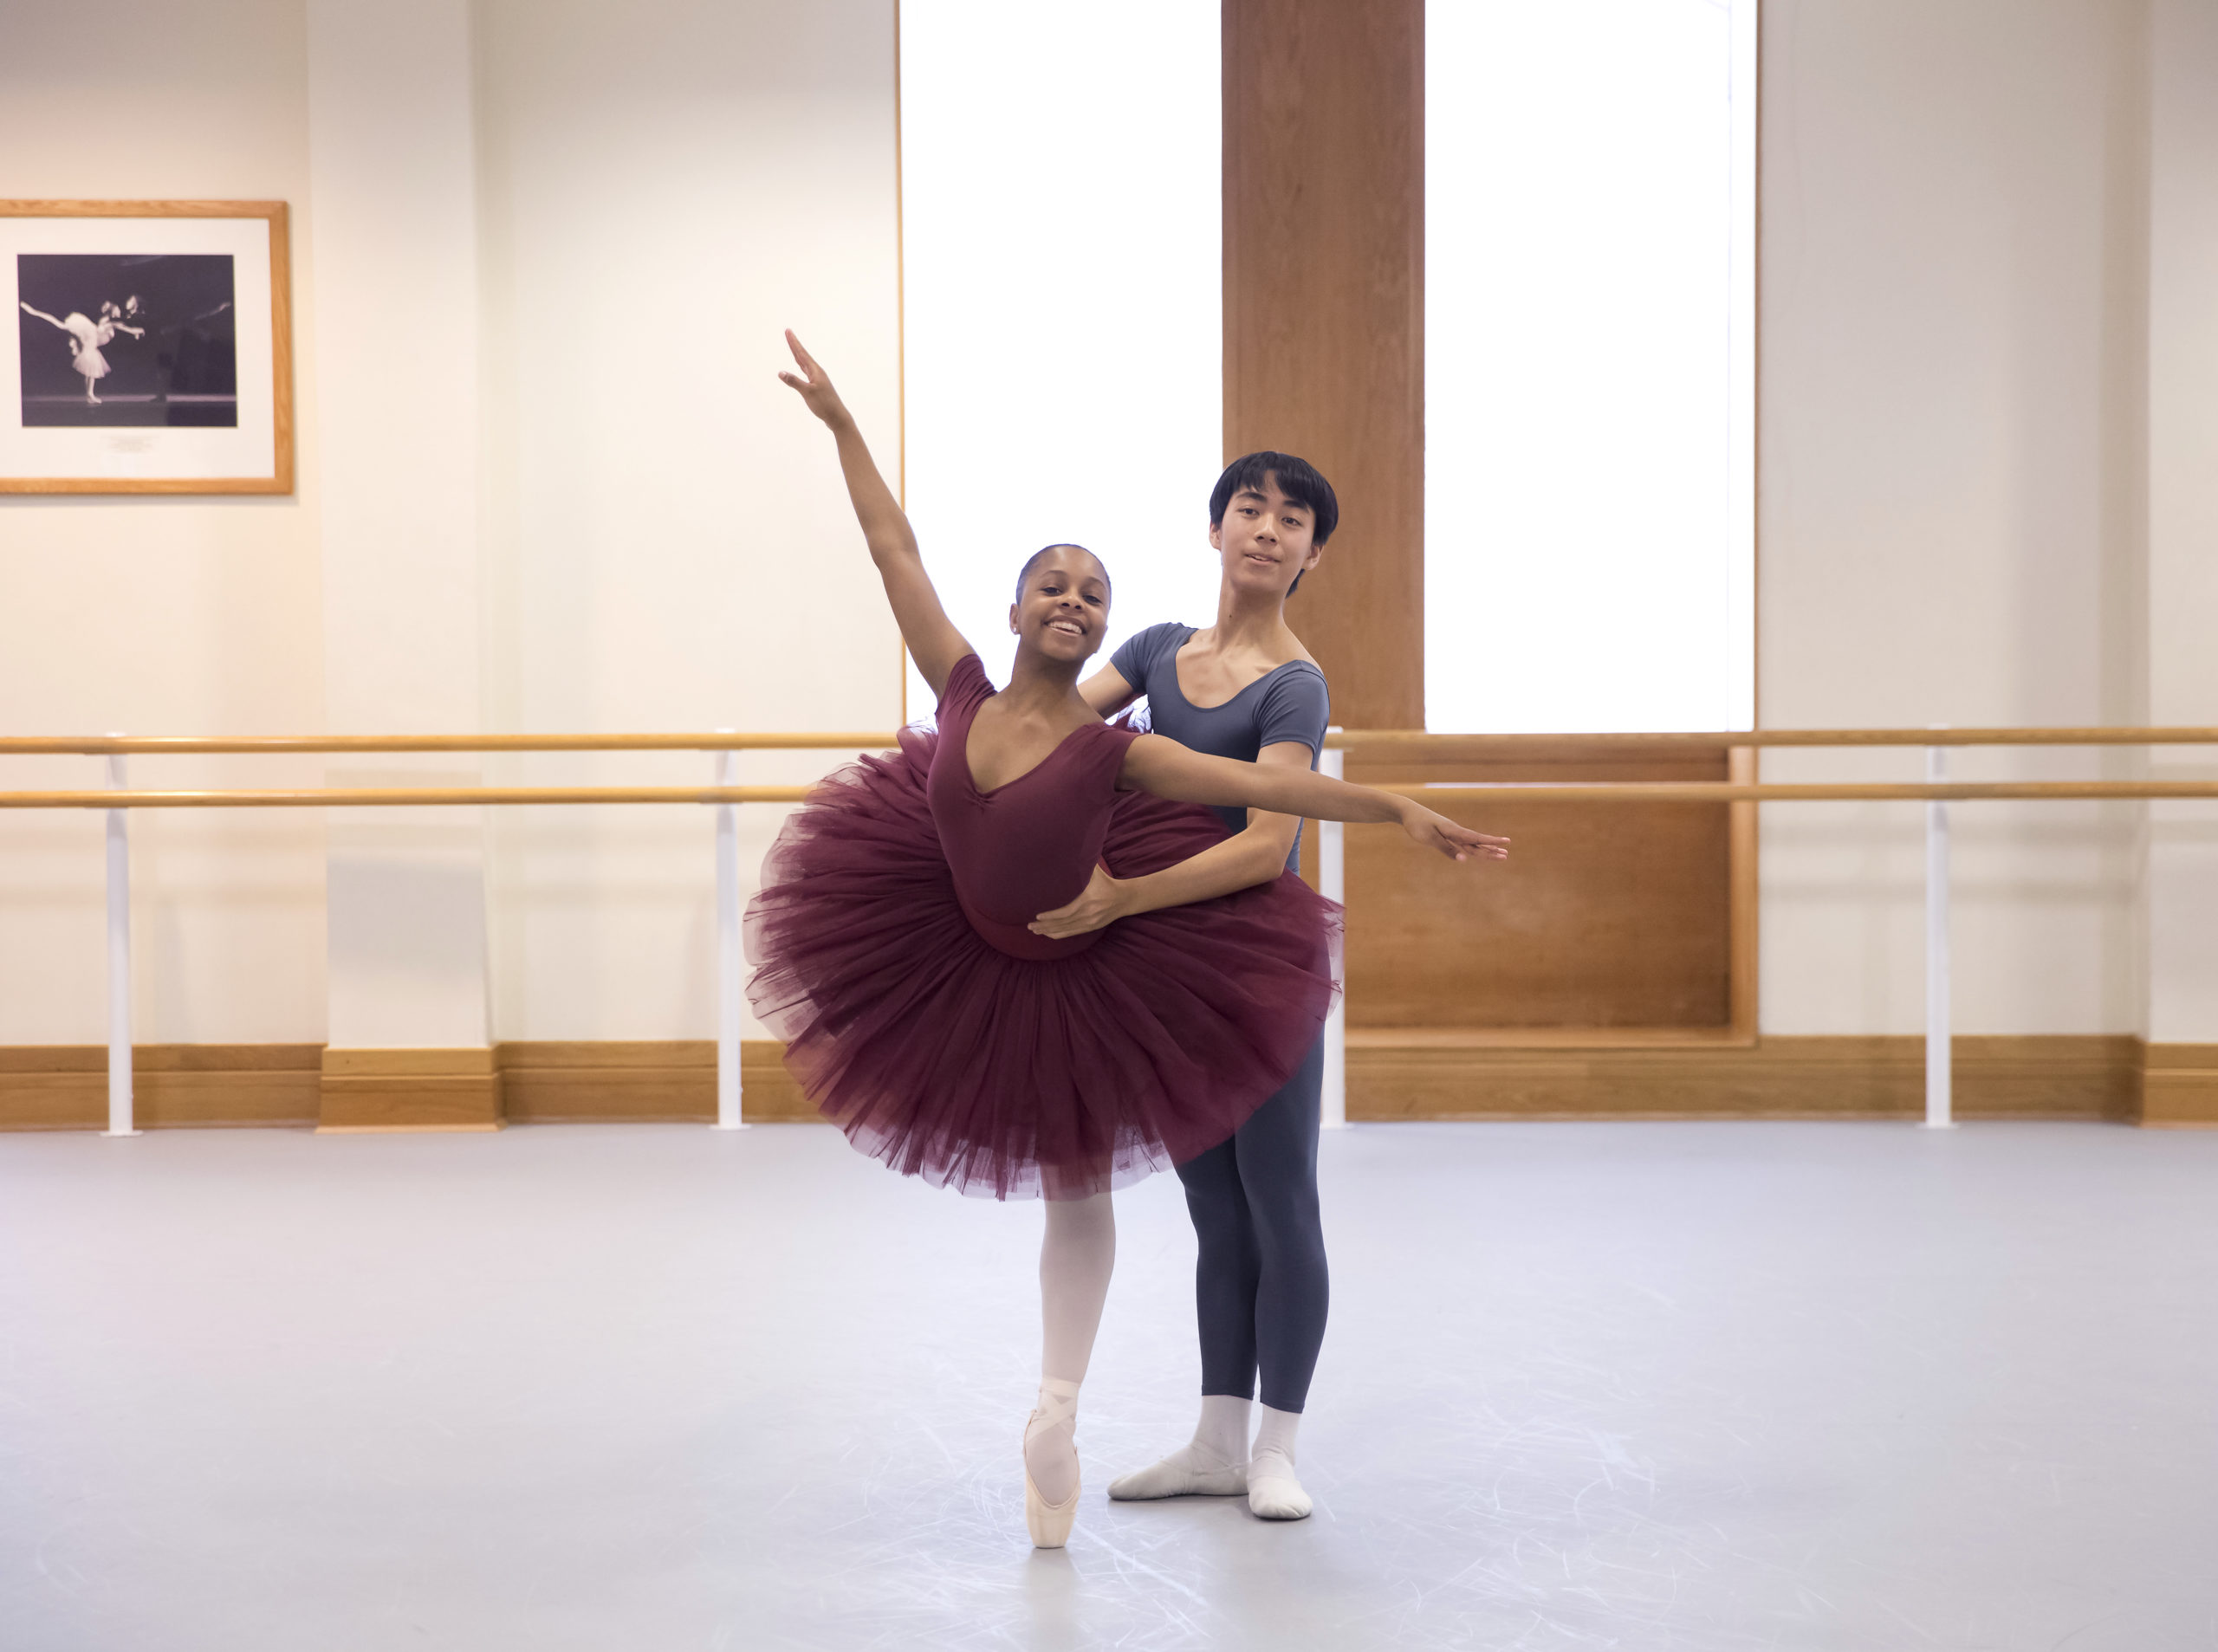 Rebecca Stewart, wearing a burgundy leotard and tutu, and pink tights and point shoes, poses in a croise arabesque on pointe while her parnter, a teenage boy, holds onto her waist from behind. The boy dancer wears a gray t-shirt and tights, and white socks and ballet slippers. They dance in a large ballet studio and both smile towards the camera.